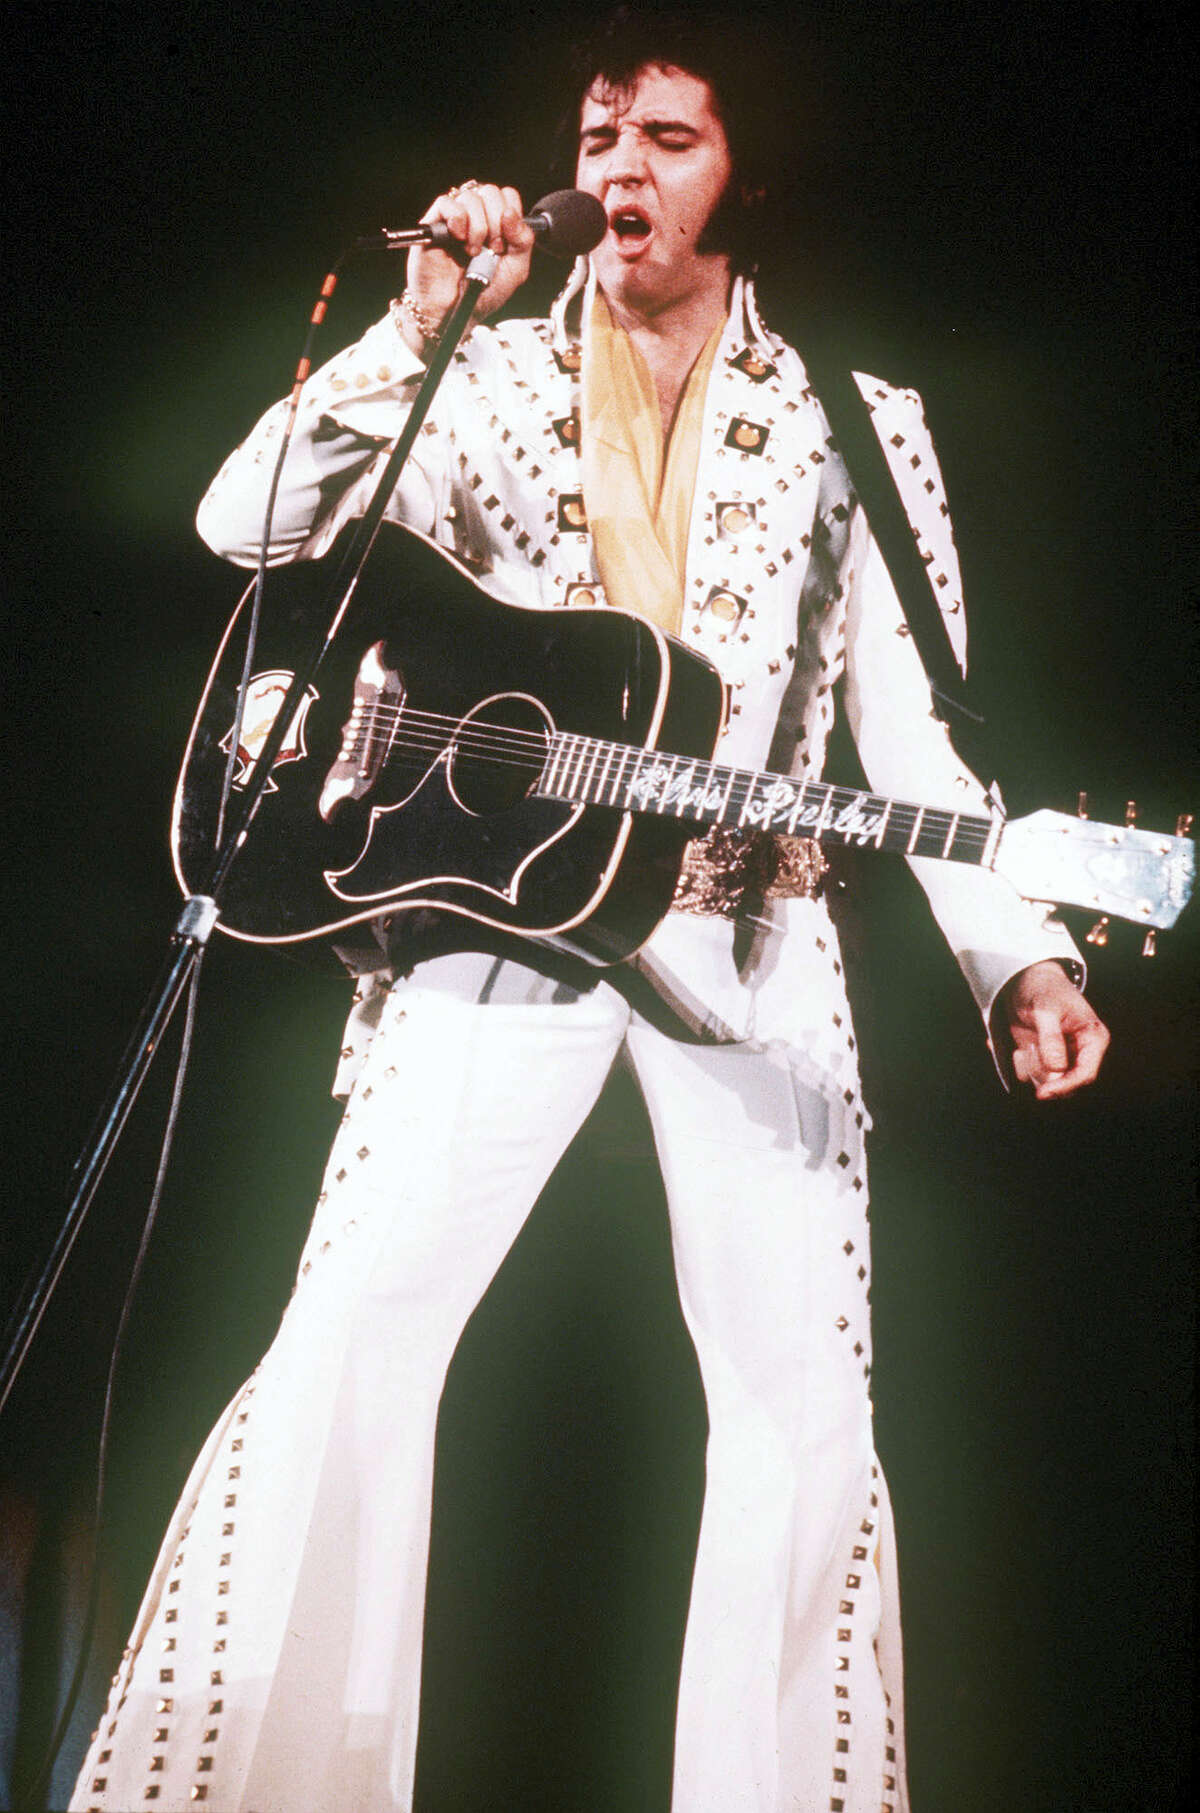 In this 1973 file photo, Elvis Presley sings during a concert. Friends and fans of late singer and actor Elvis Presley are descending on Memphis, Tenn., for Elvis Week, the annual celebration of his life and career. It coincides with the 40th anniversary of the passing of Presley, who died on Aug. 16, 1977.